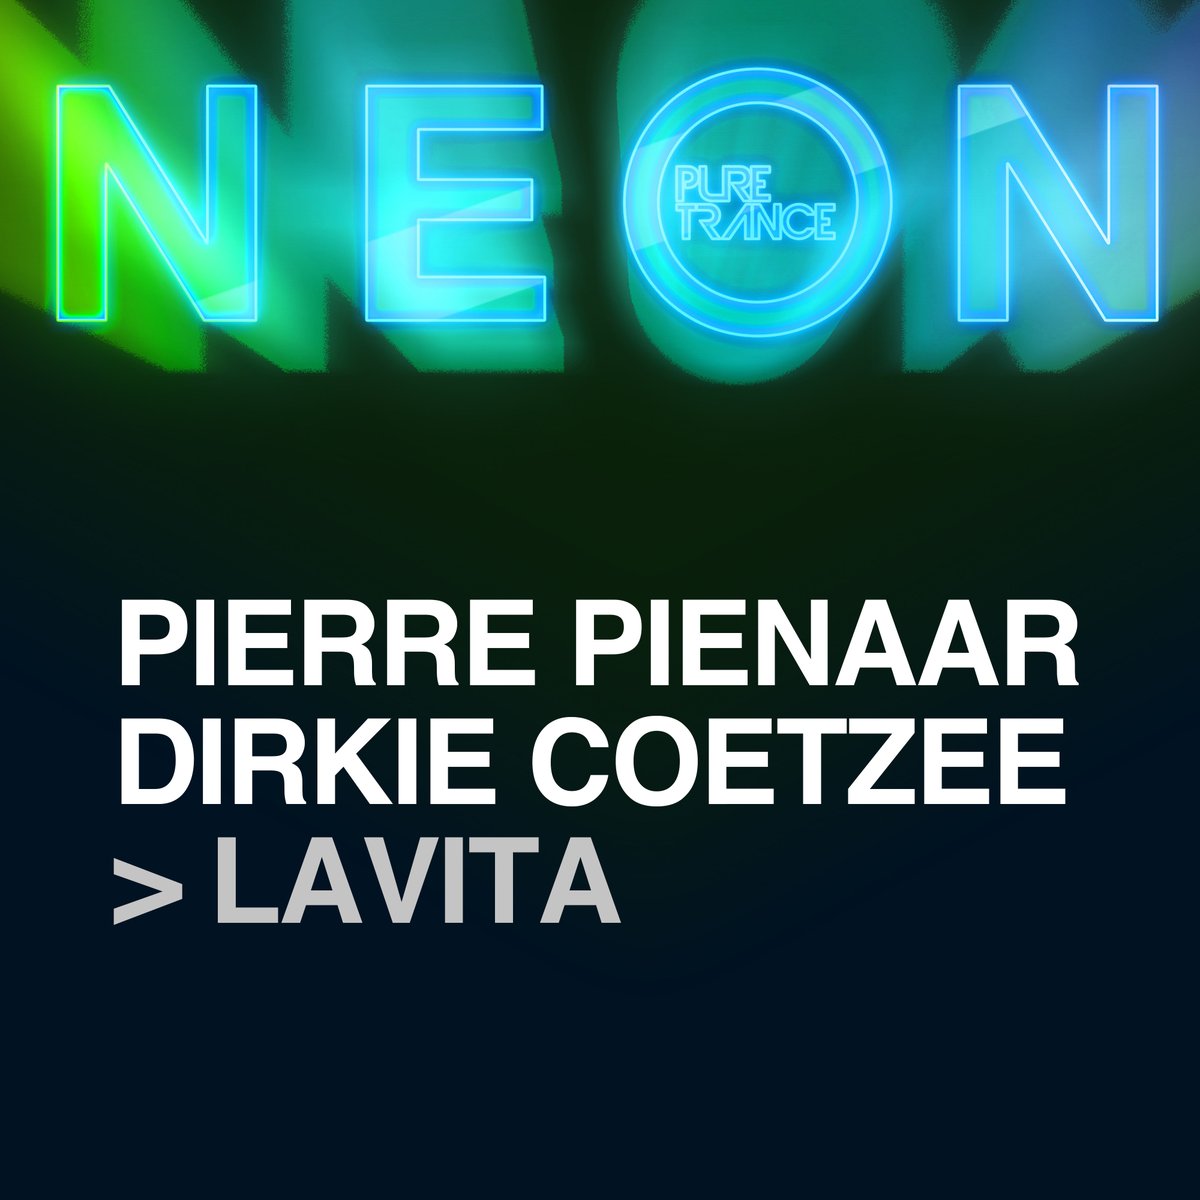 It’s this week’s BIG TUNE from two wonderful people :) Big Tune: 11. Pierre Pienaar & Dirkie Coetzee - Lavita [Pure Trance NEON] Out on the 22nd: pure.complete.me/lavita